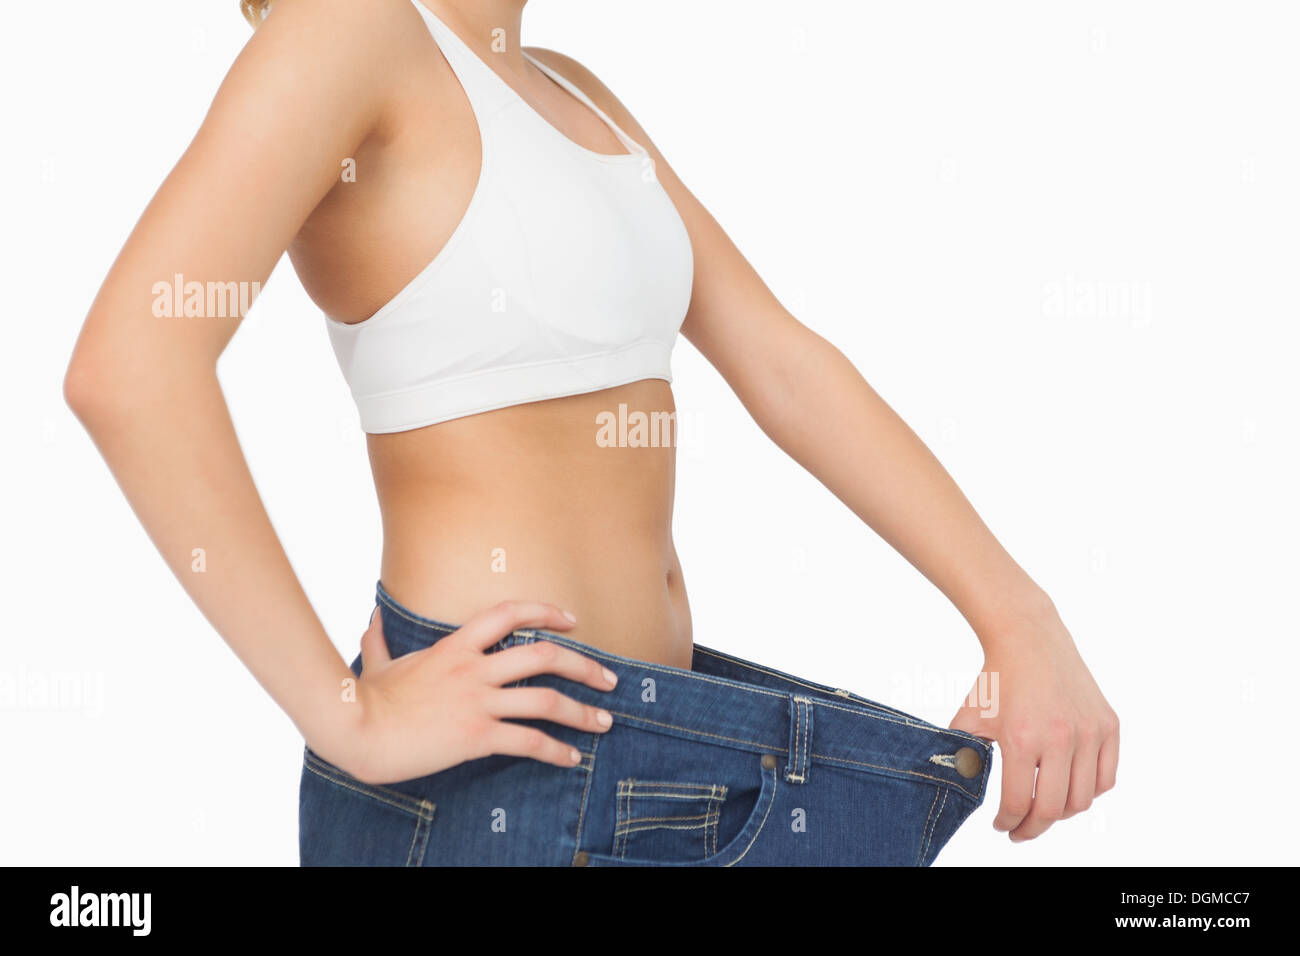 Mid section of slim young woman wearing too big jeans Stock Photo